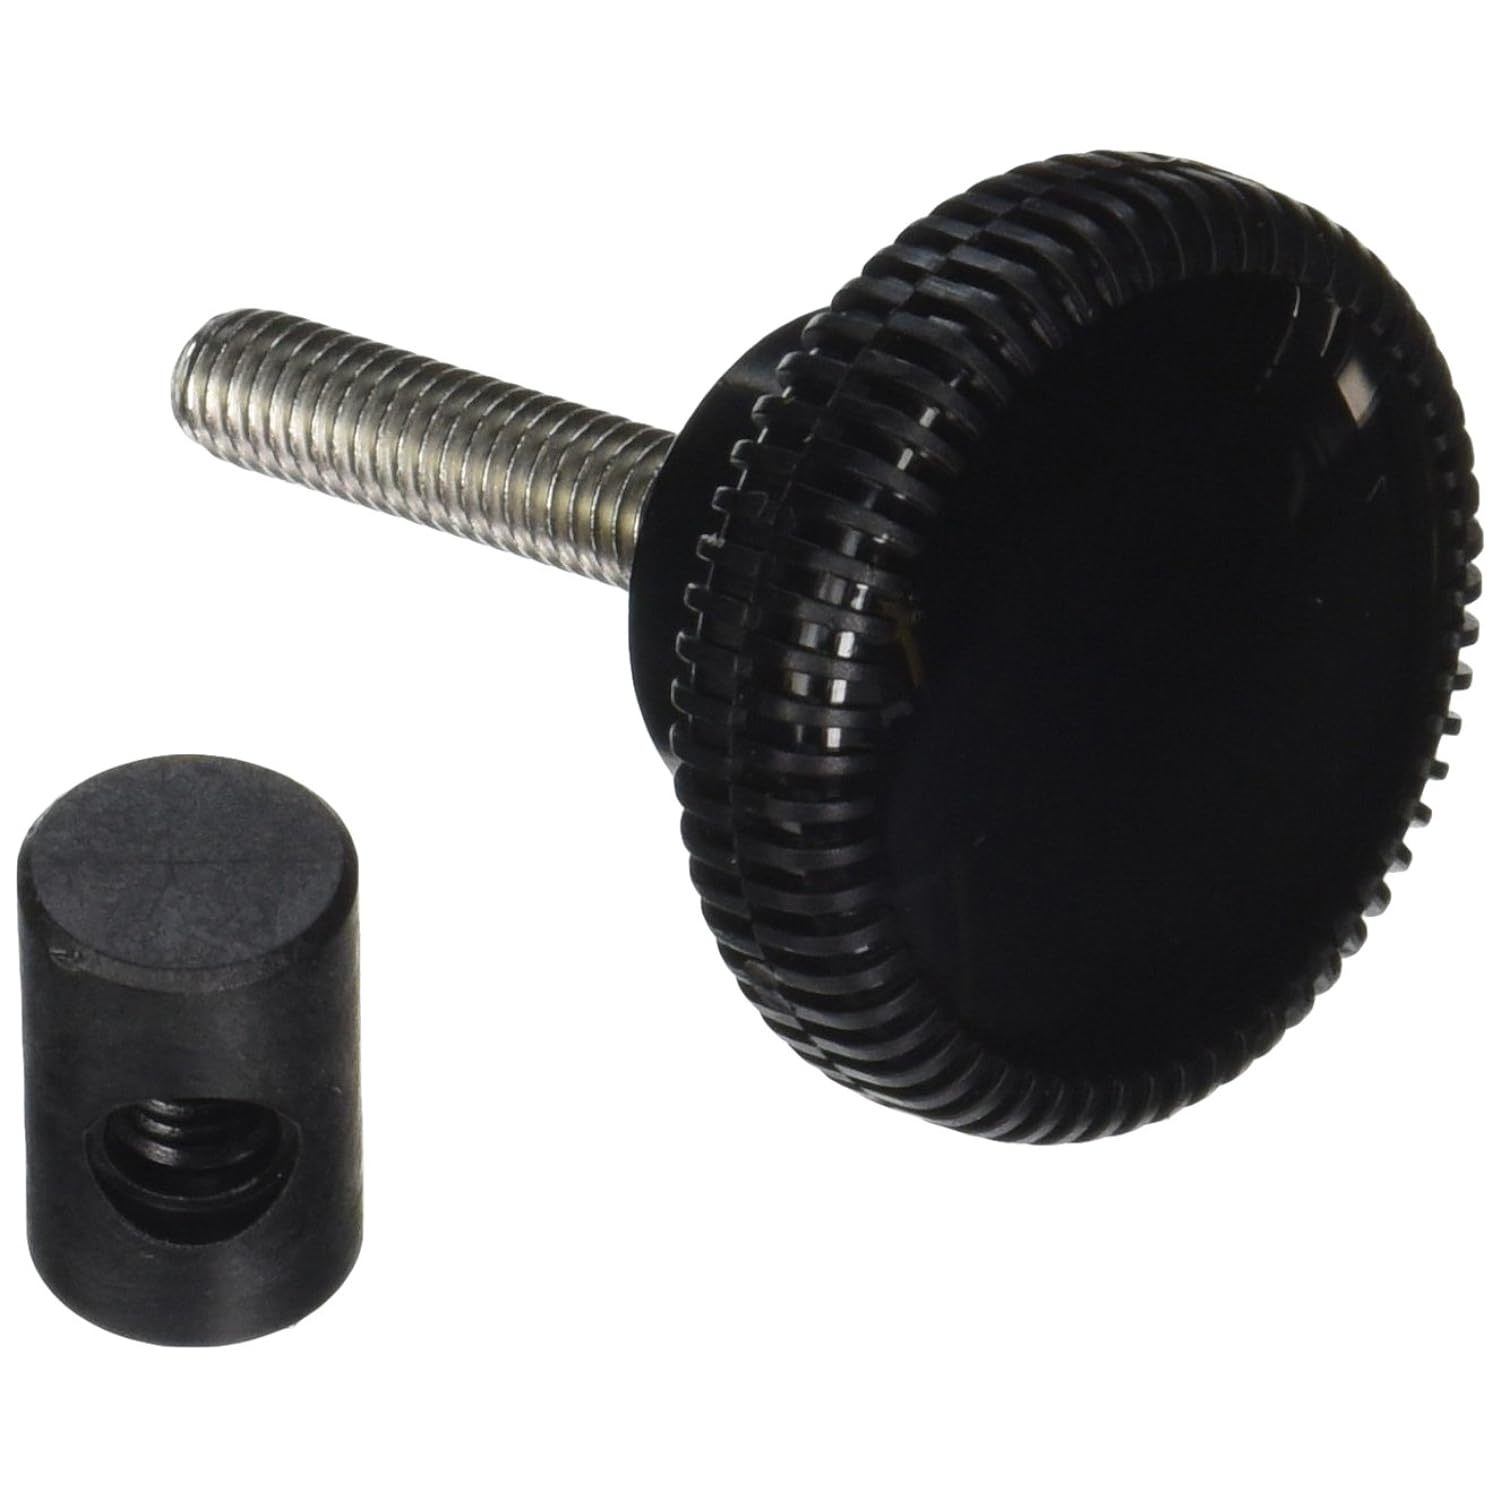 Primary image for Hayward SPX1600PN Swivel Nut and Knob Replacement for Hayward Superpump and MaxF